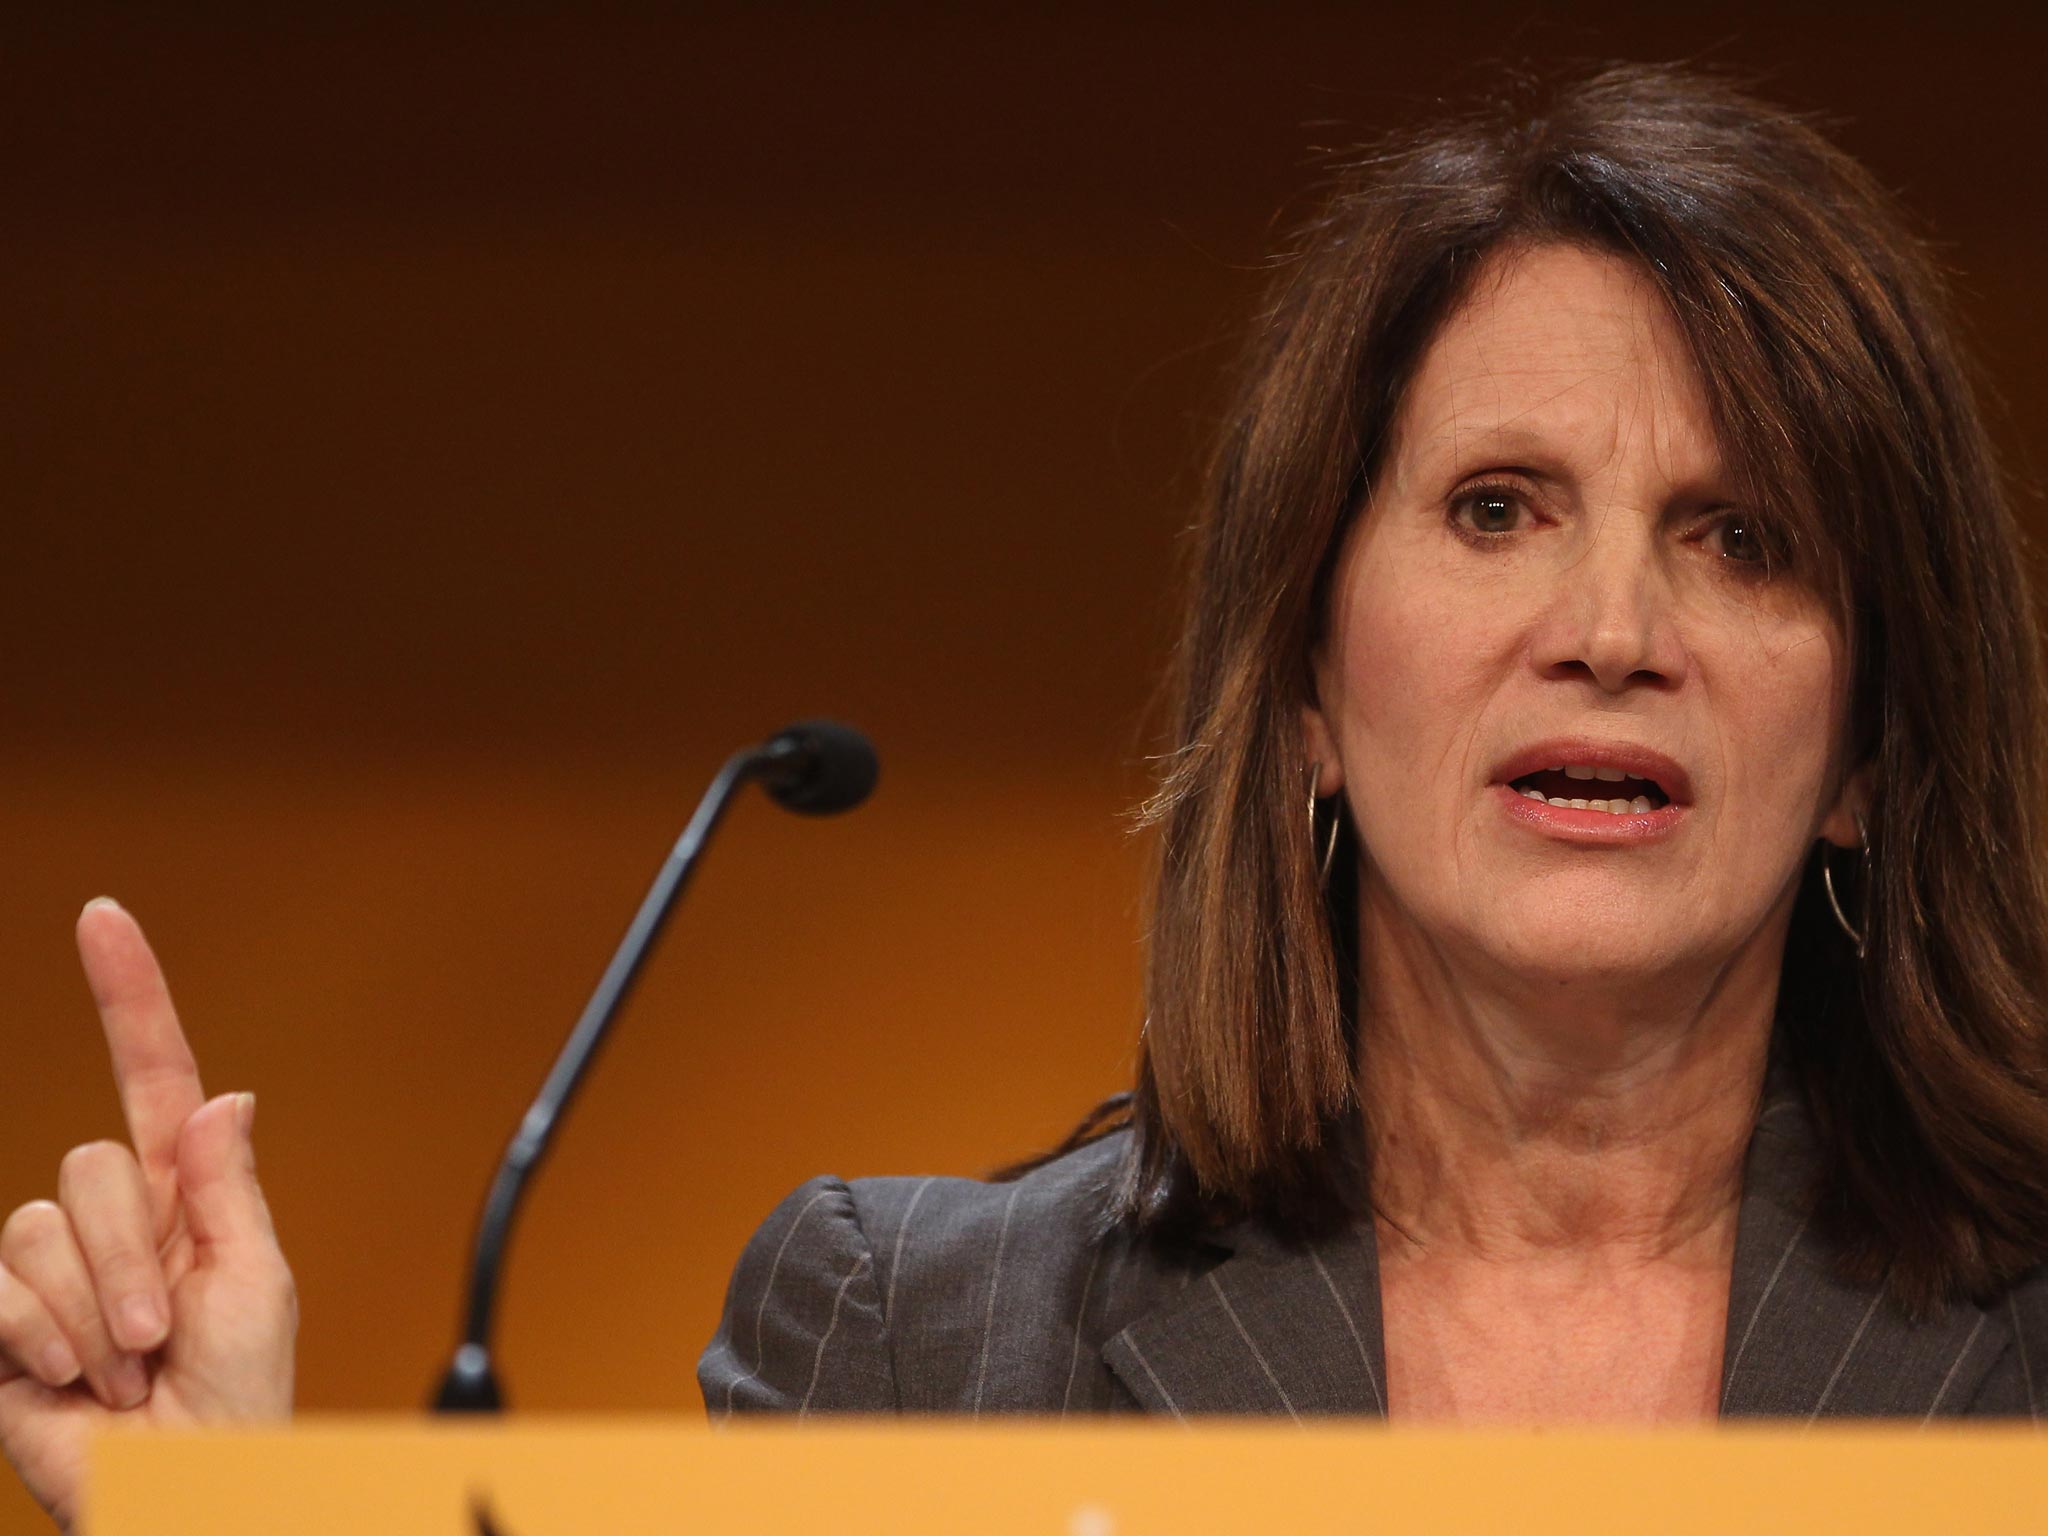 Lynne Featherstone is one a handful of female Liberal Democrat MPs. Nick Clegg acknowledged his embarrassment that just 12 per cent of the Lib Dem MPs elected in 2010 were women